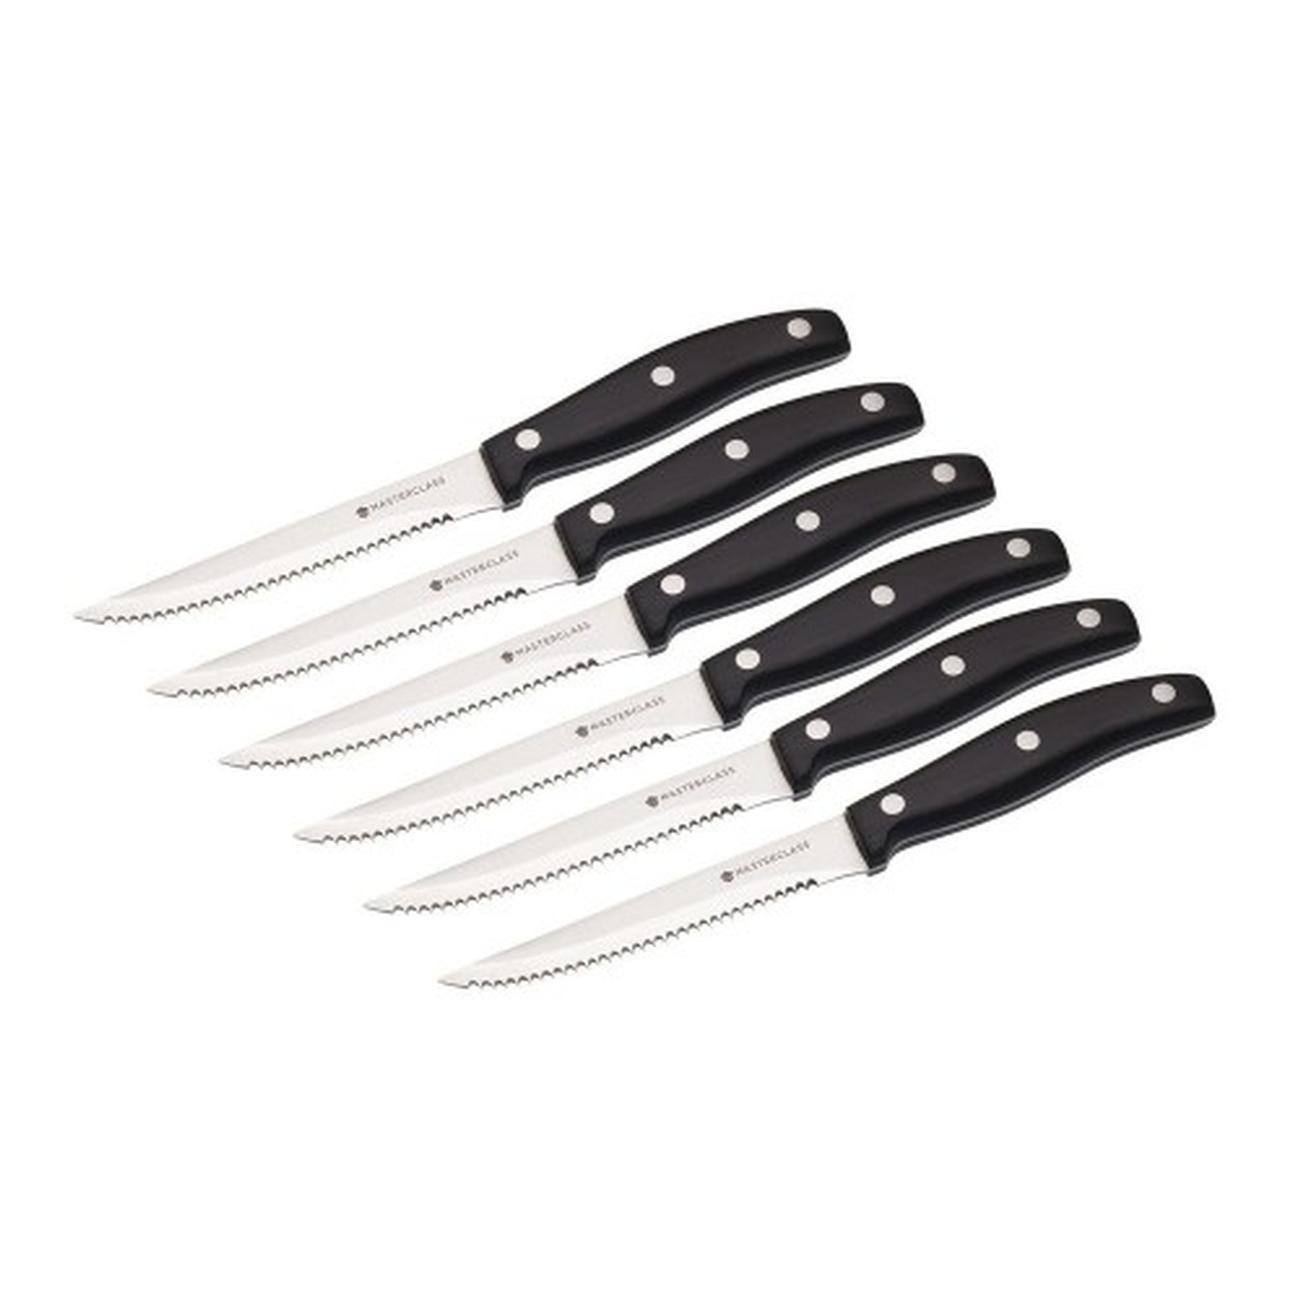 https://www.thekitchenwhisk.ie/contentfiles/productImages/Large/mc-deluxe-6piece-steak-knife-set1.jpg